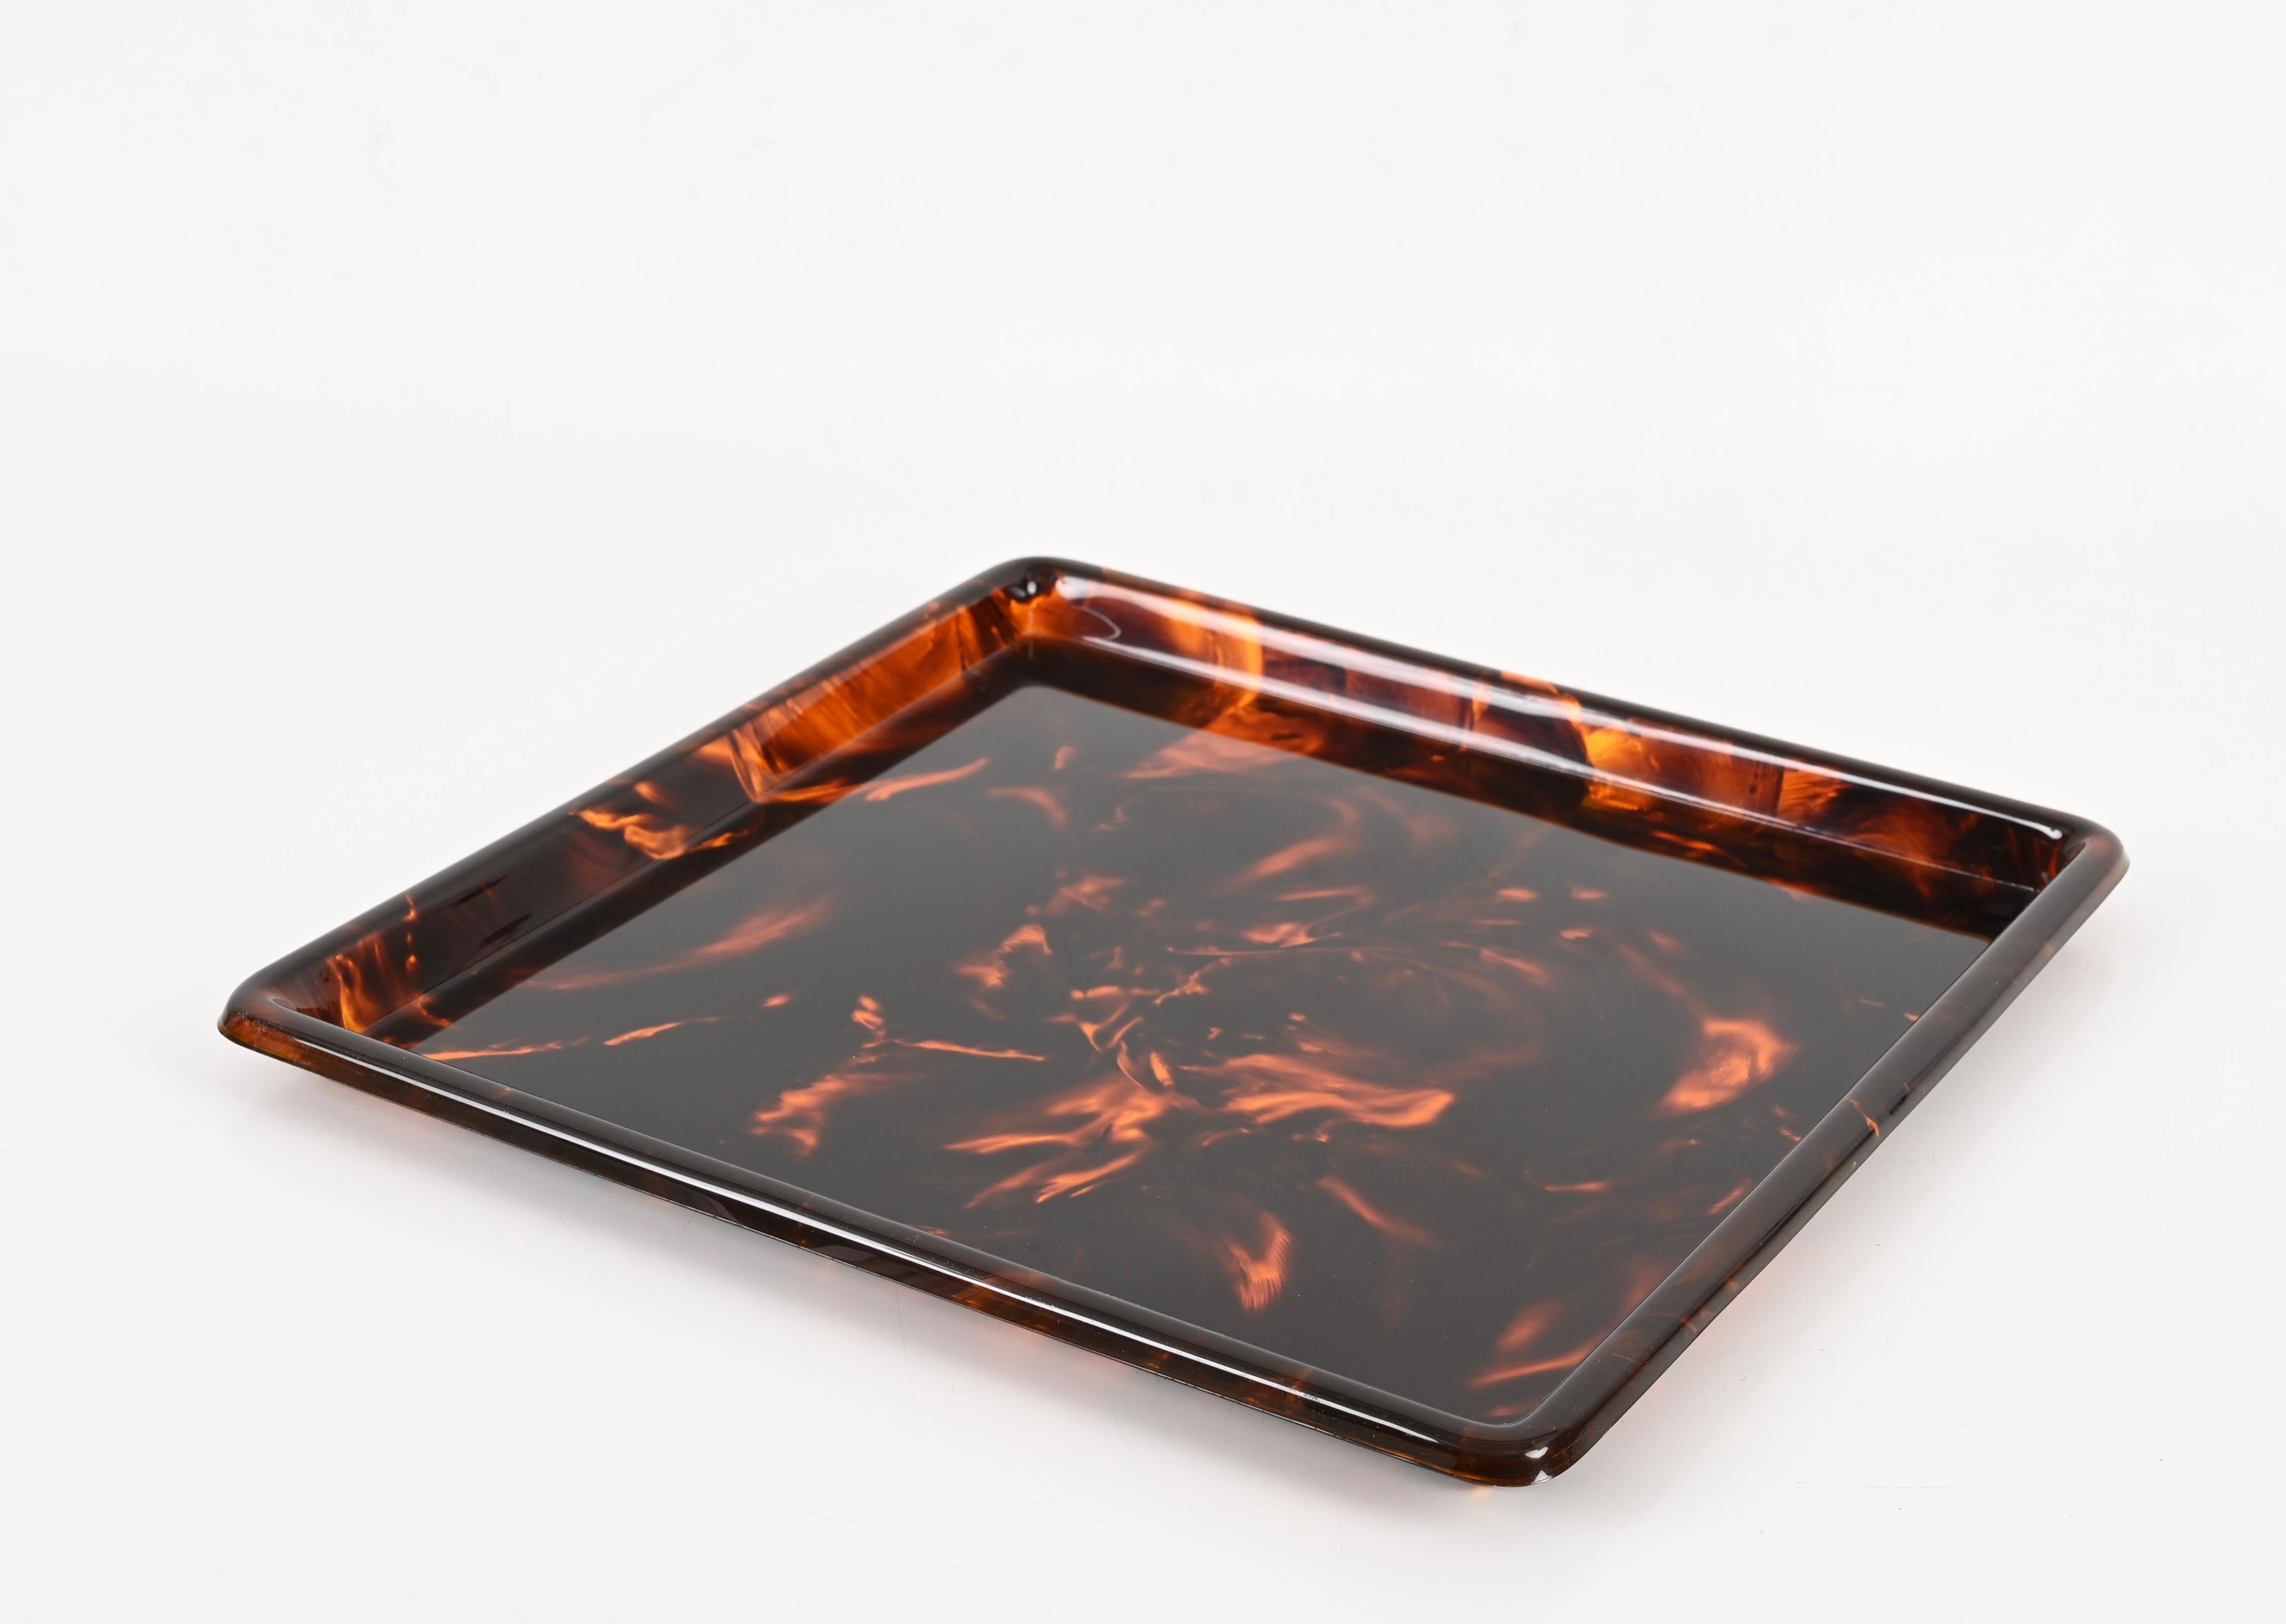 Christian Dior Square Tortoiseshell Effect Lucite Serving Tray, Italy 1970s For Sale 2